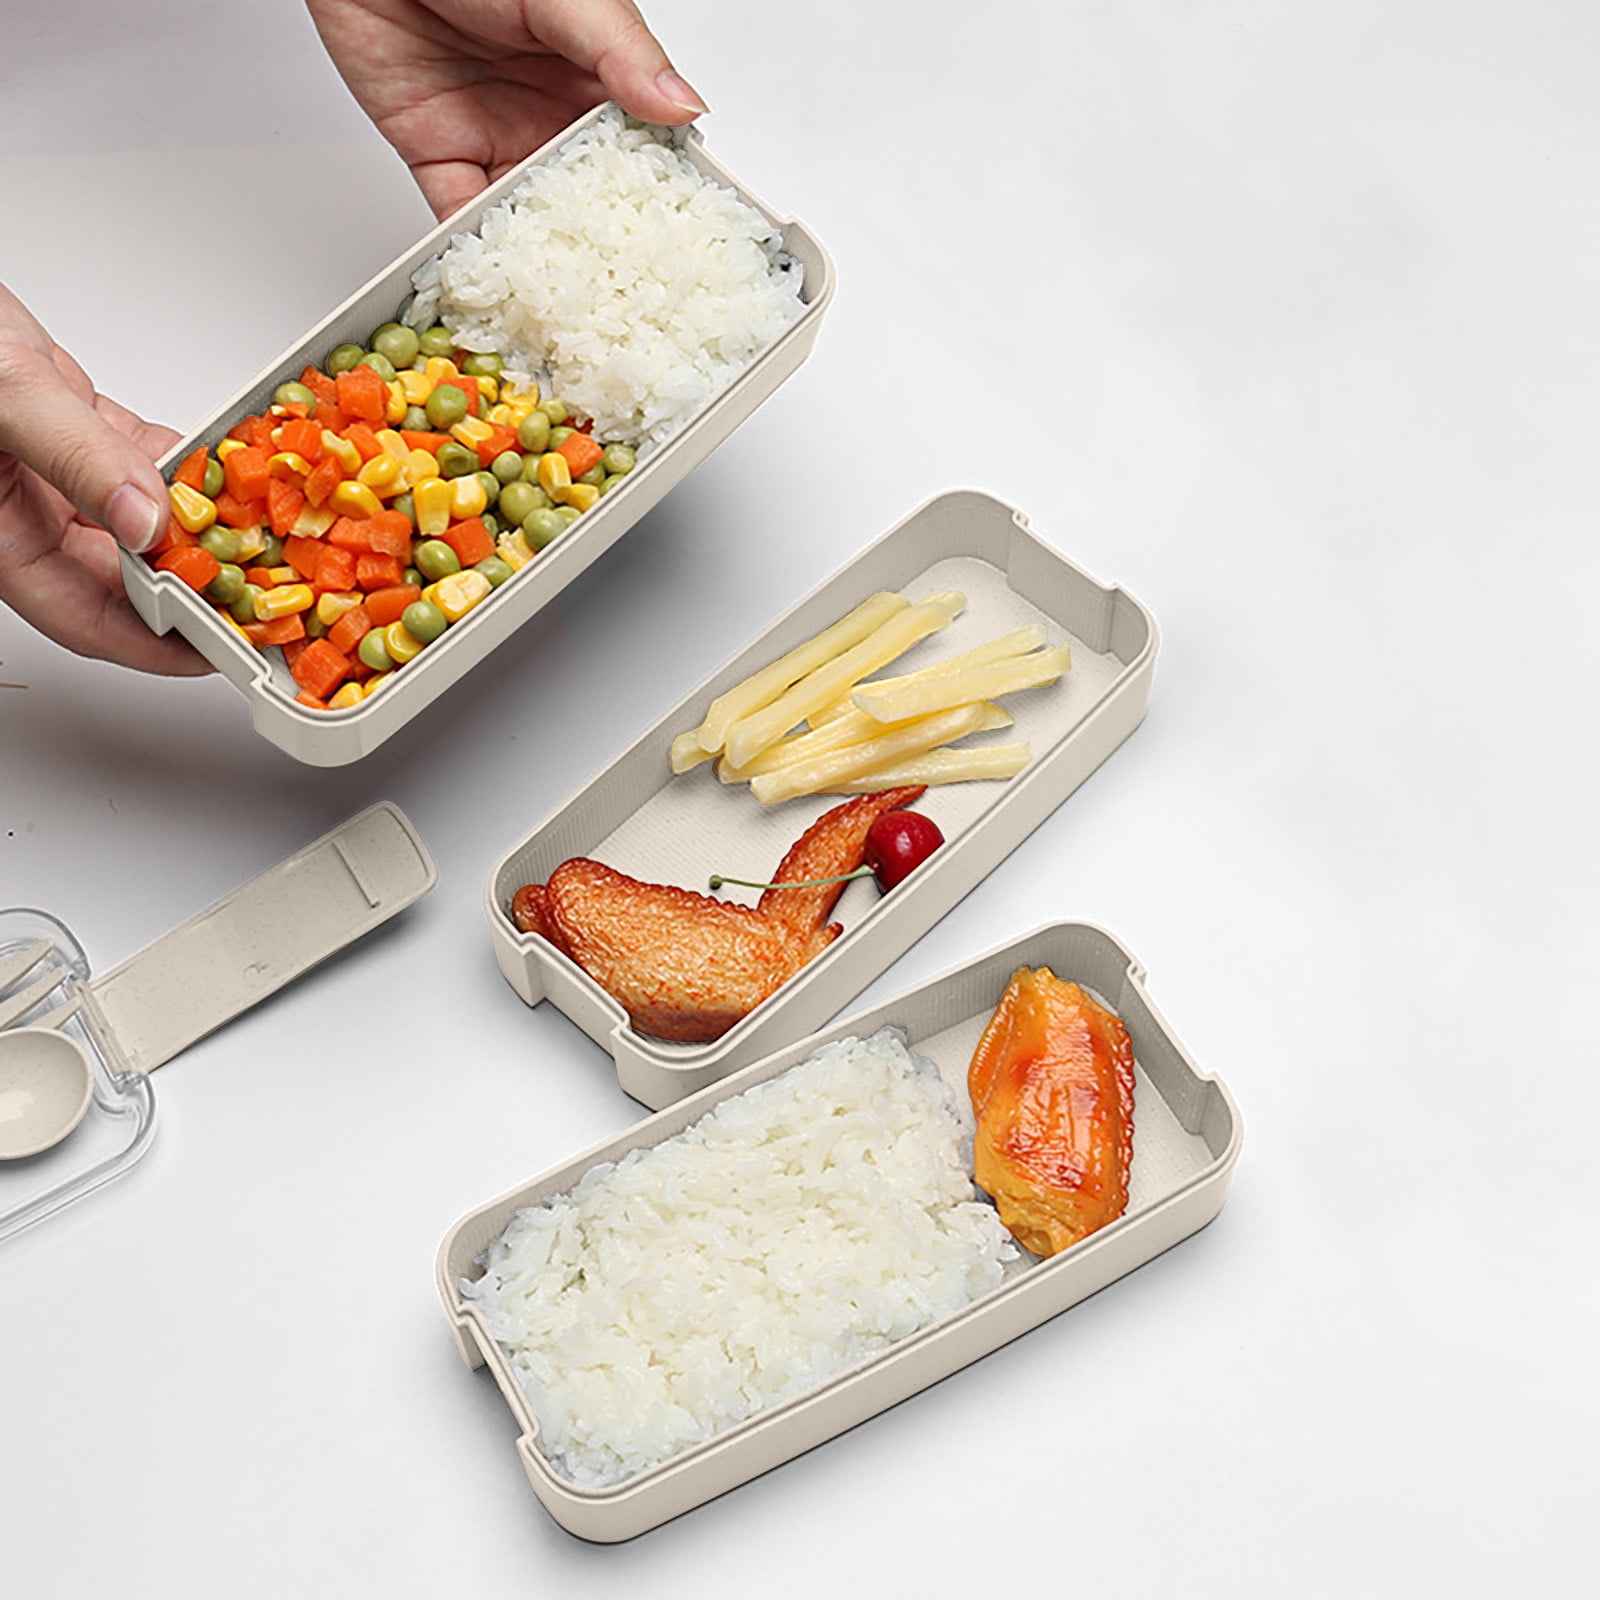 Stackable Bento Lunch Set with Phone Stand - Progress Promotional